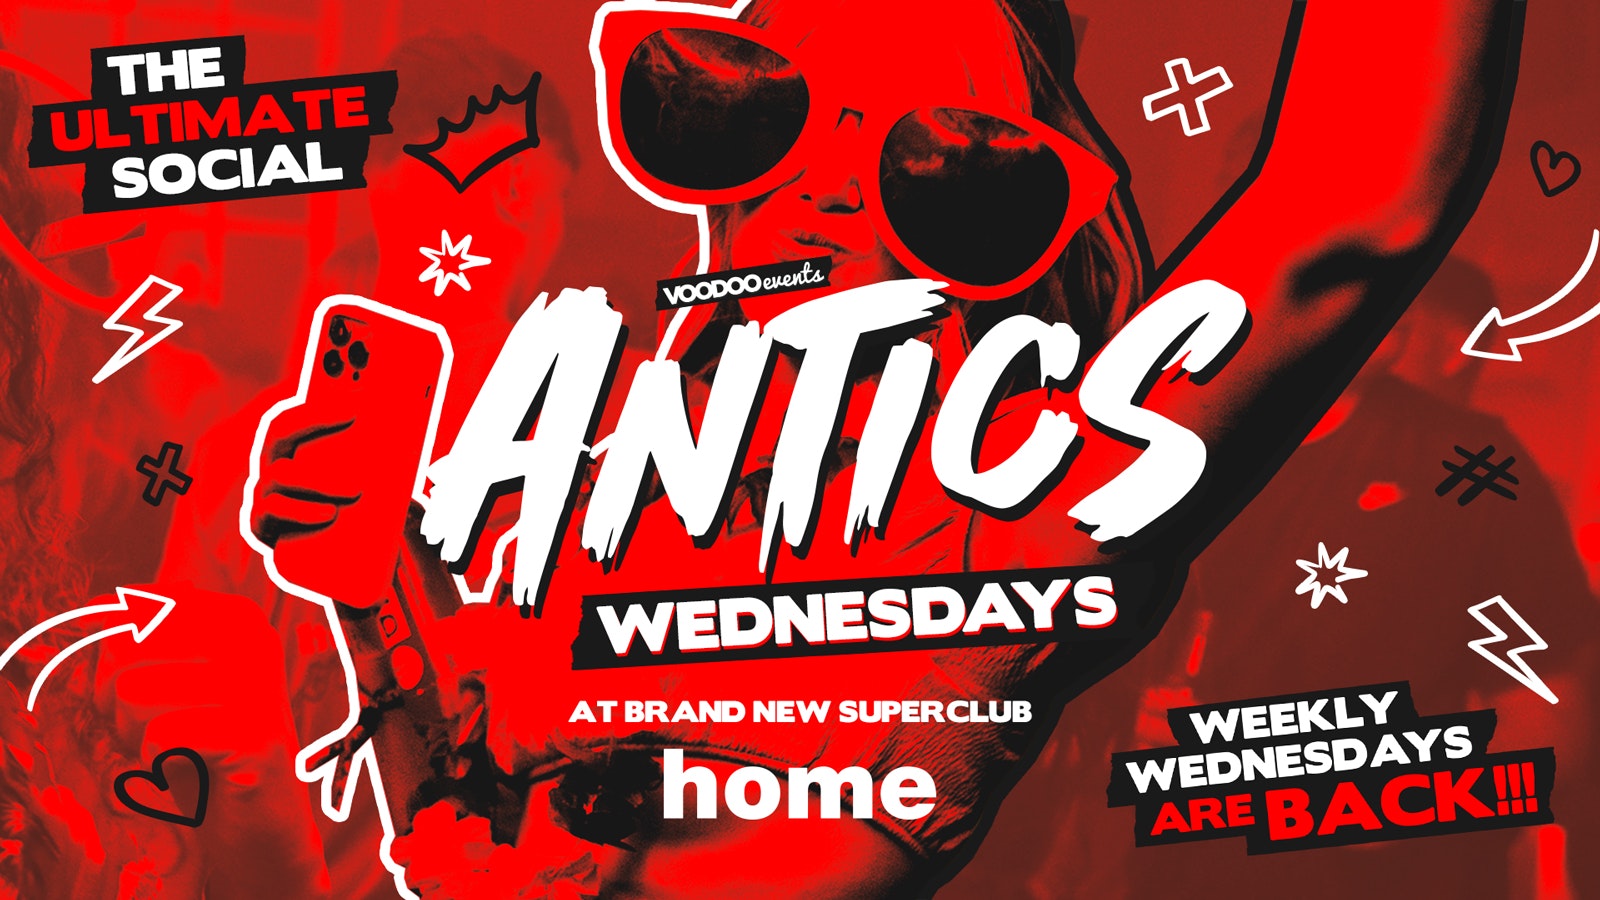 Antics @ THE BRAND NEW SUPER CLUB HOME – Wednesday 29th May